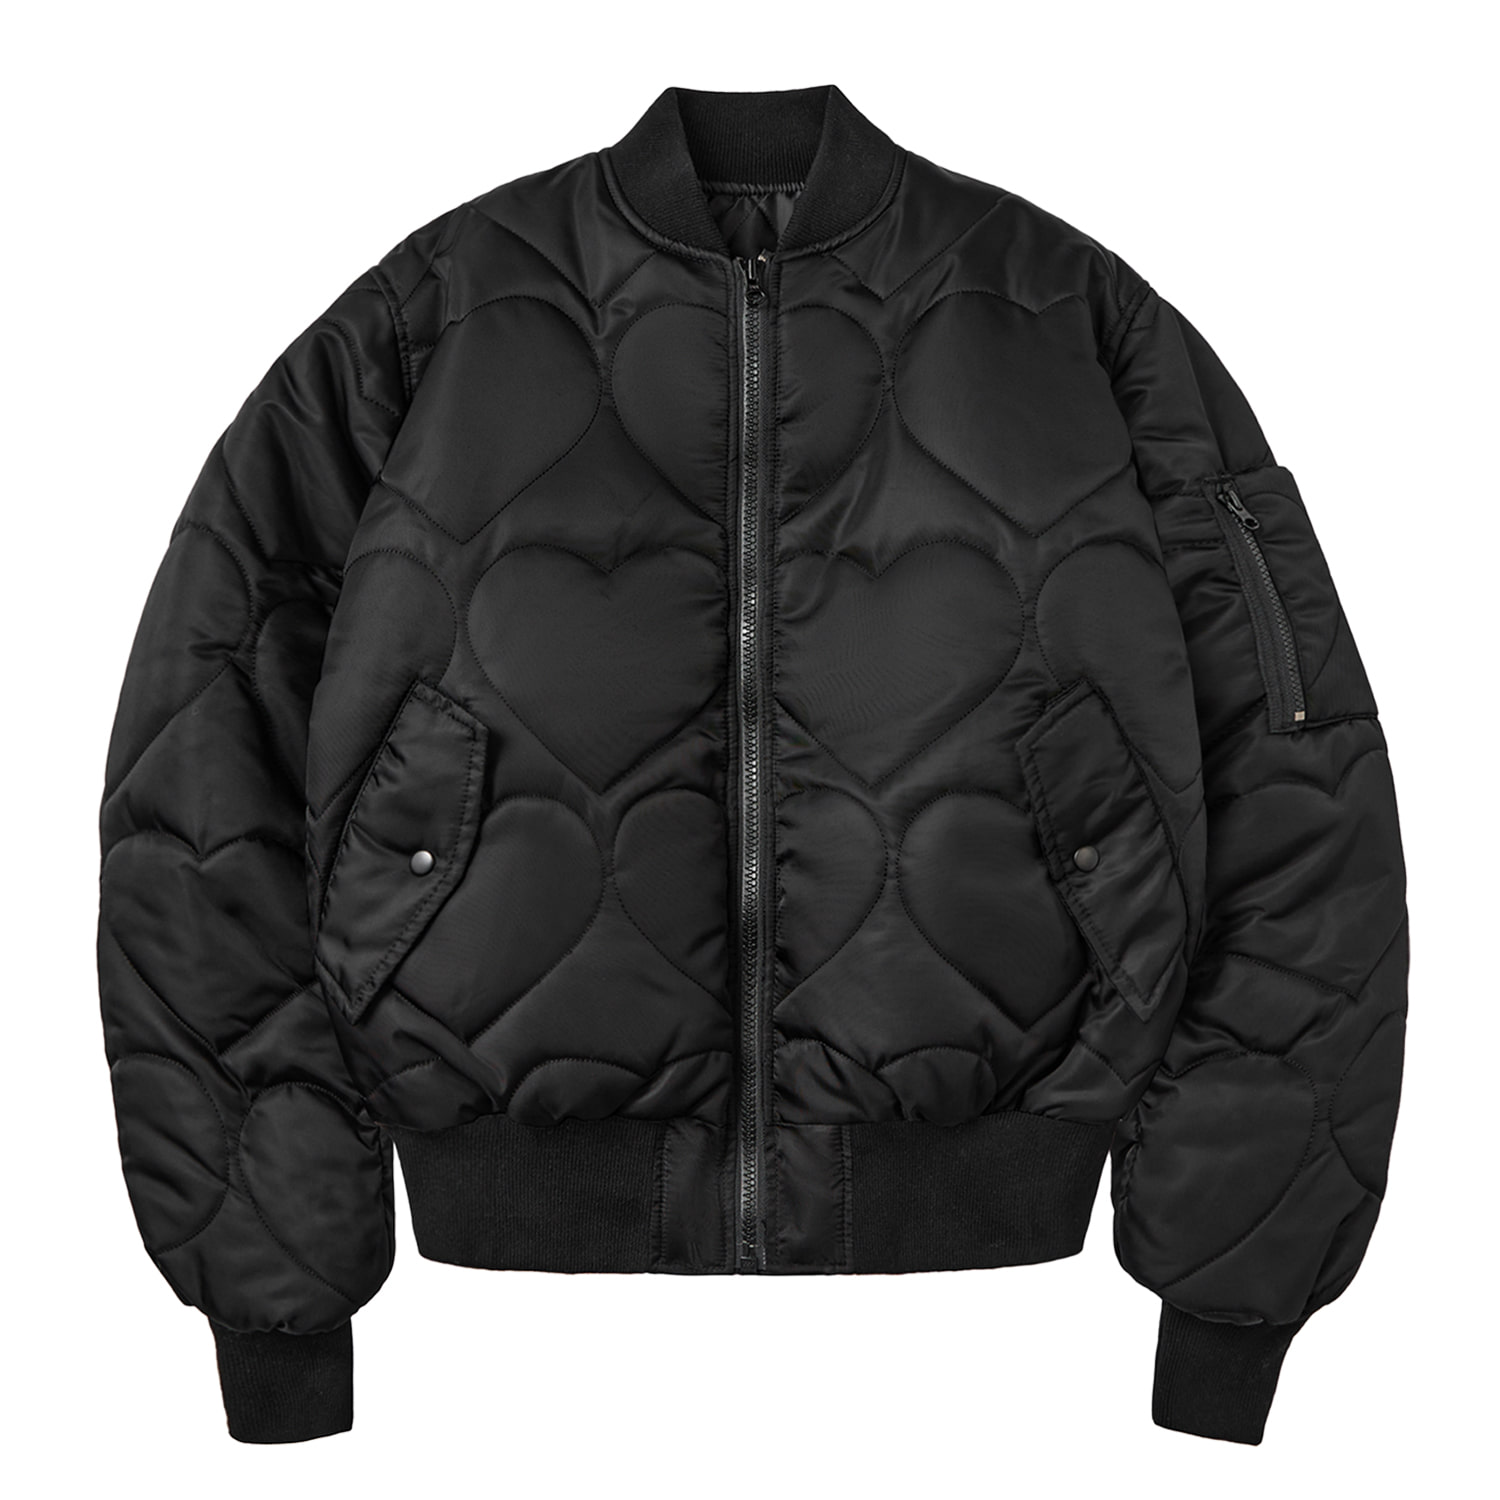 HEART QUILTED MA-1 JACKET - BLACK